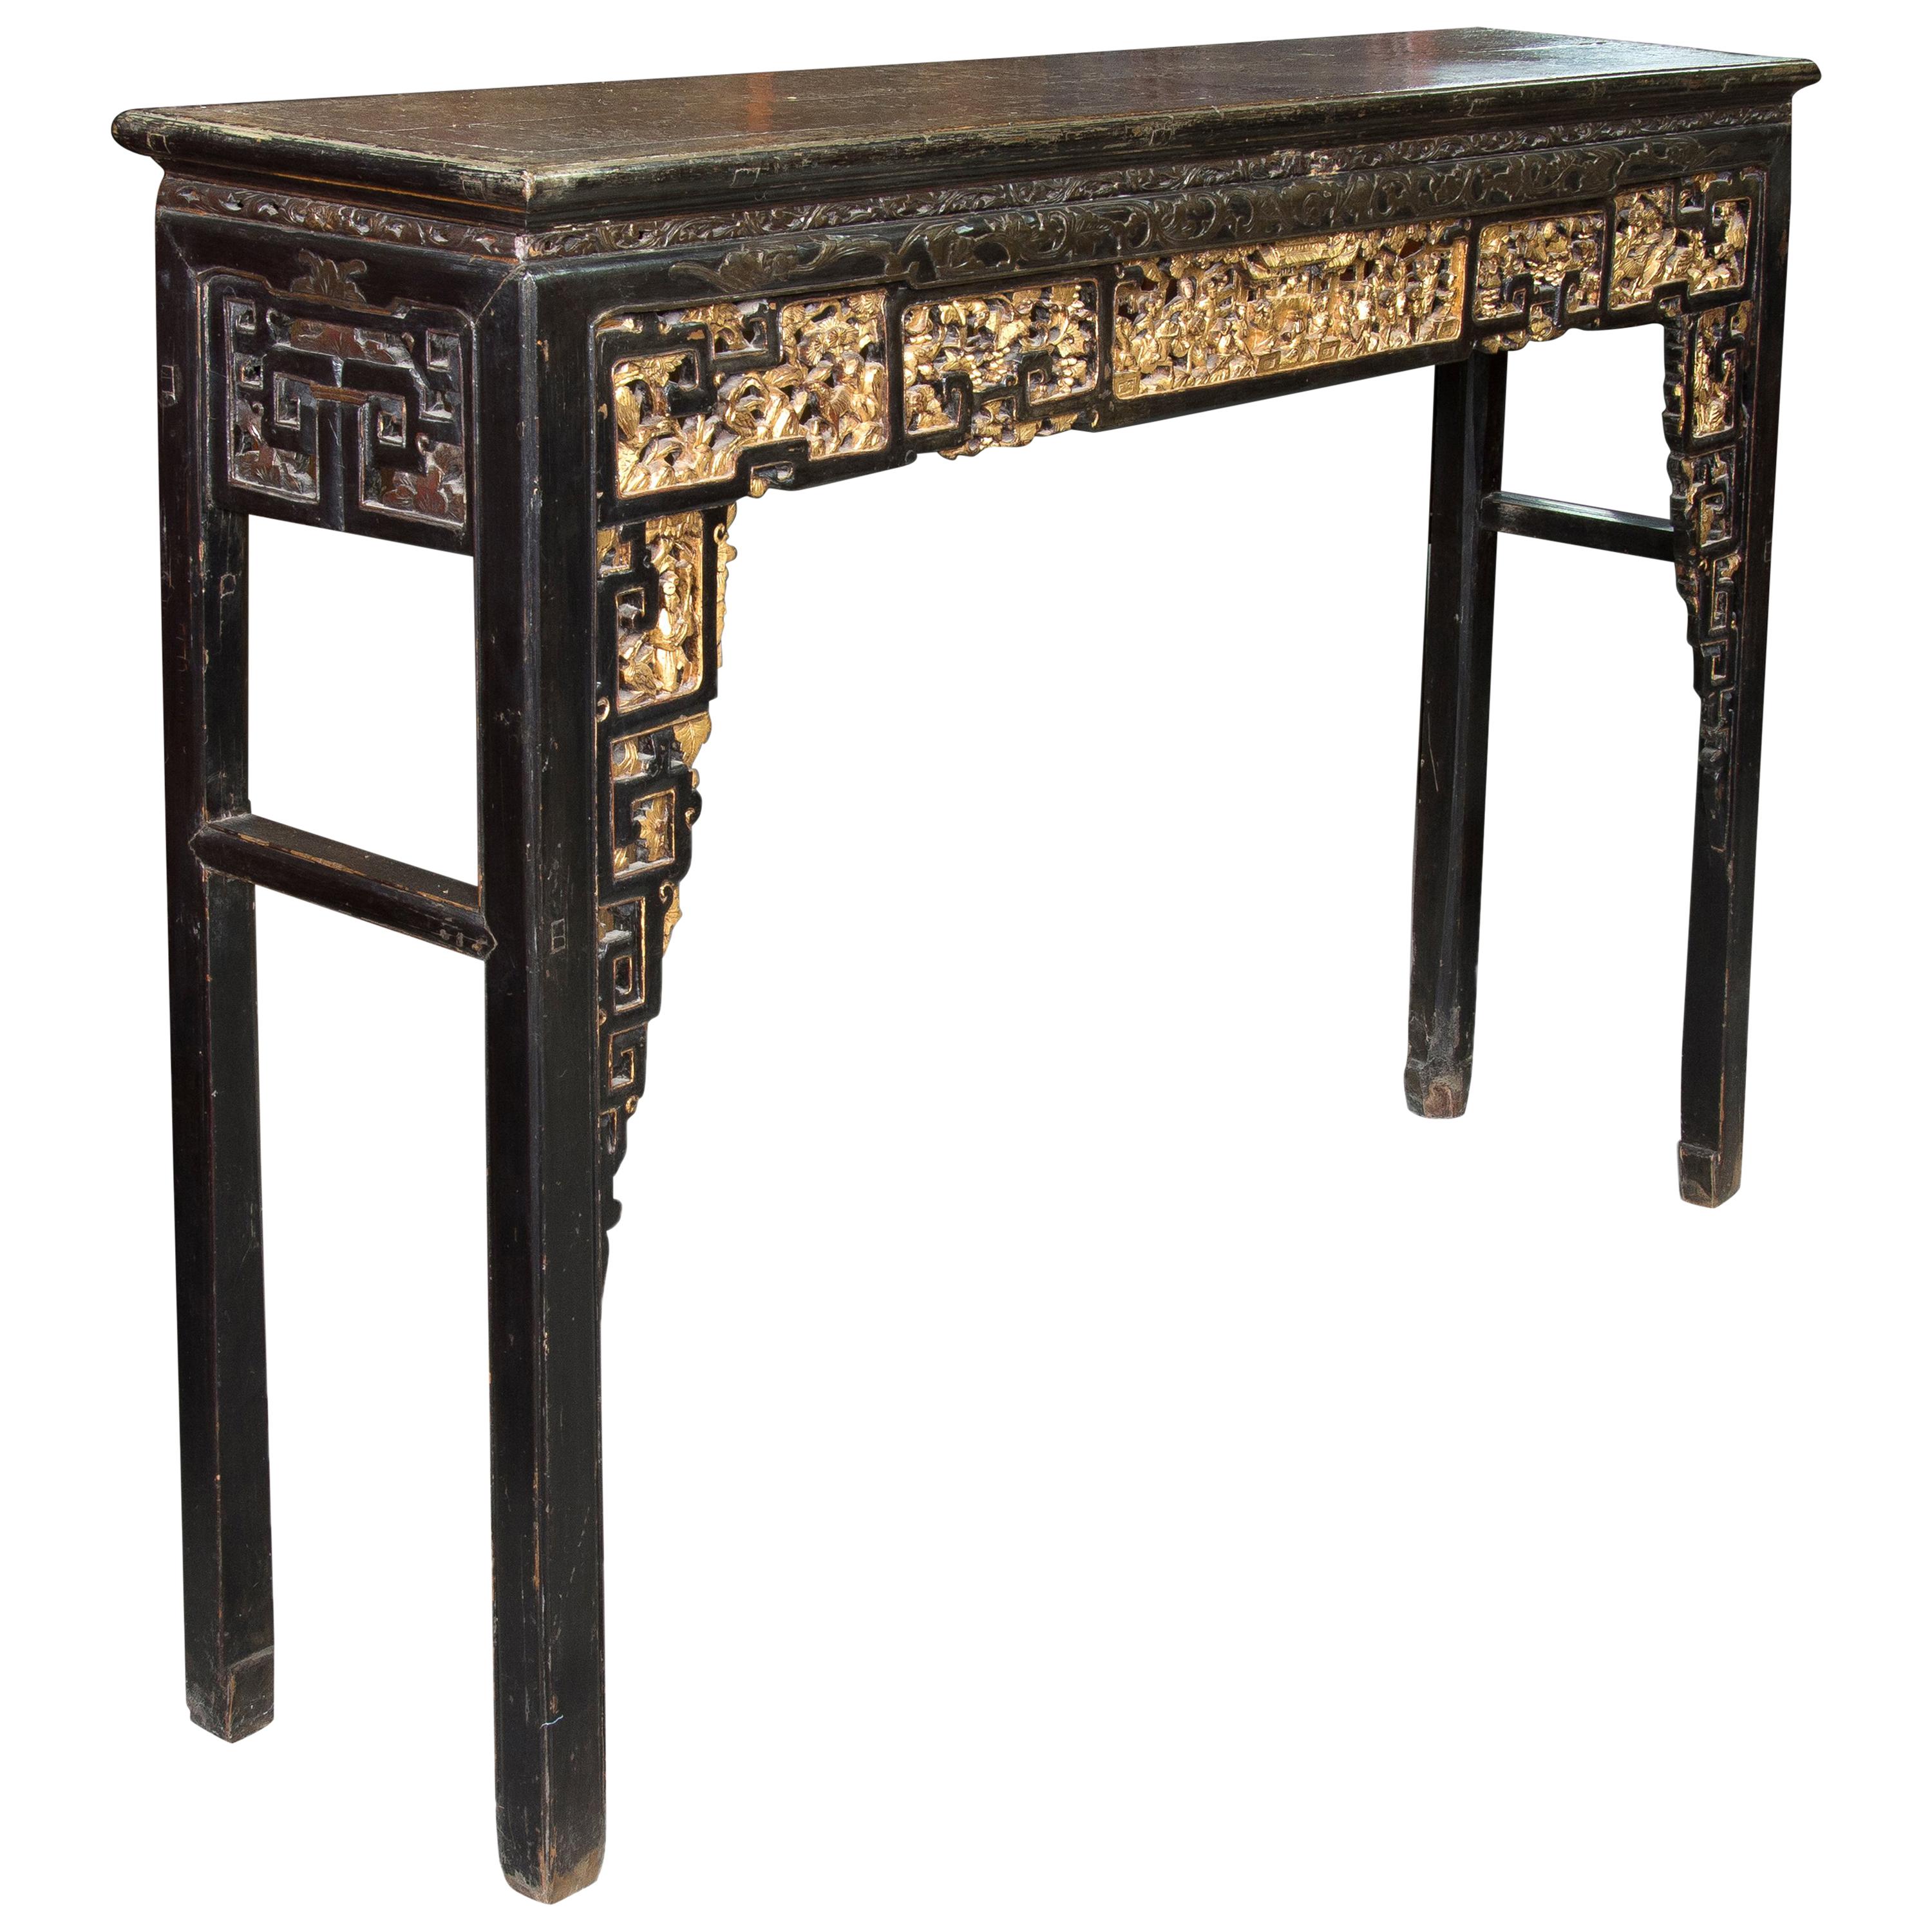 Oriental Table, Wood, Possibly China, 19th-20th Century